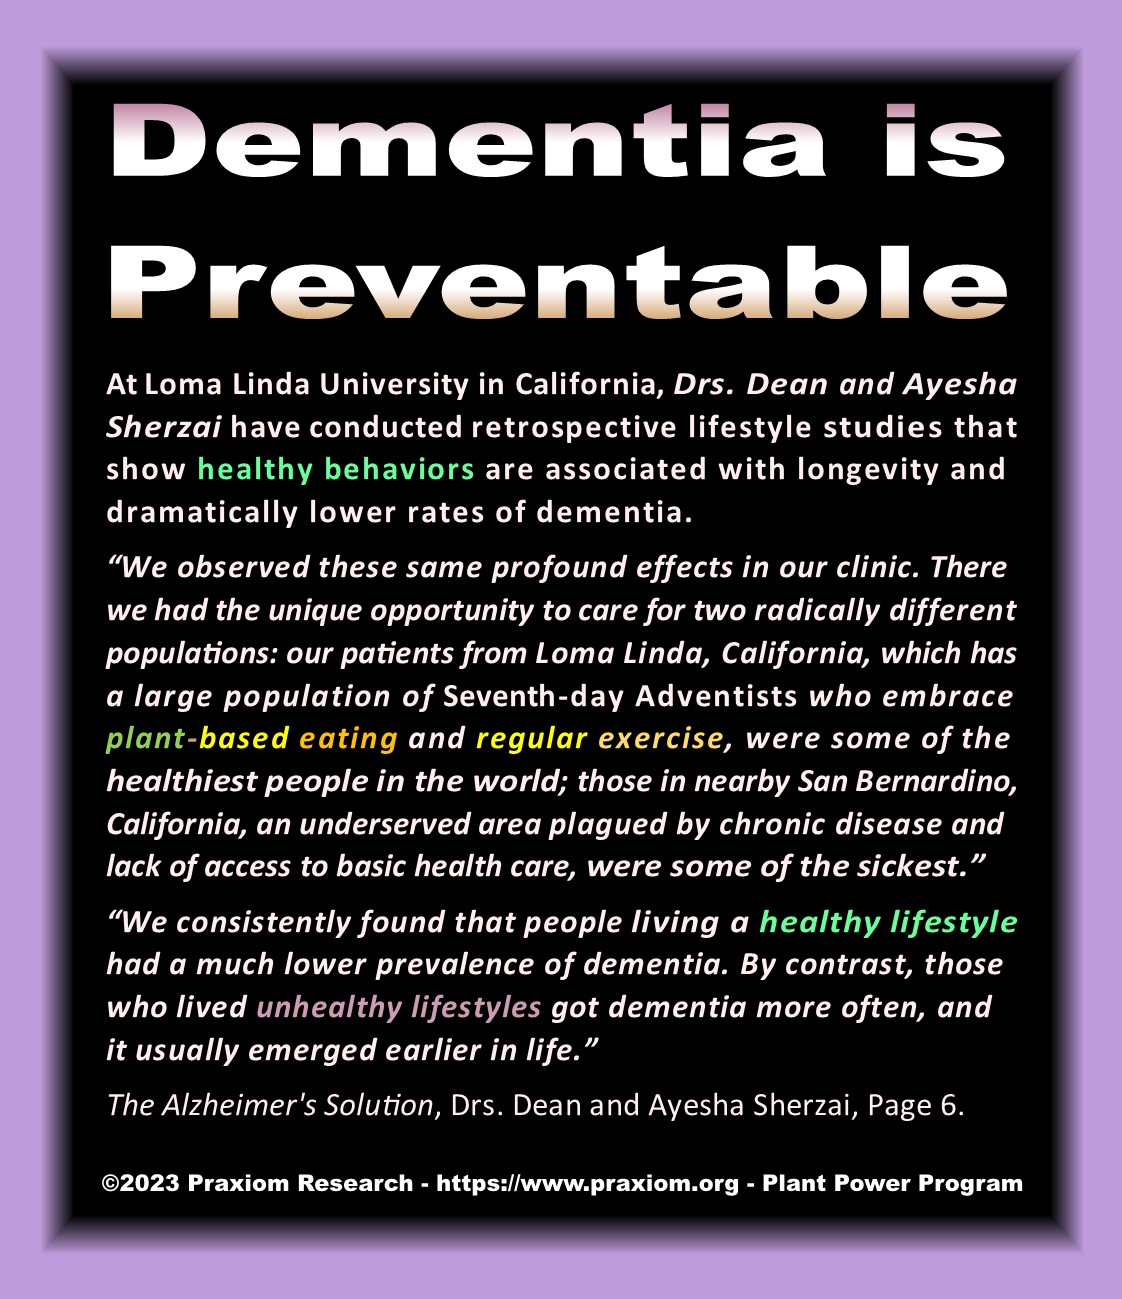 Dementia is Preventable - Dr. Dean Sherzai and Dr. Ayesha Sherzai